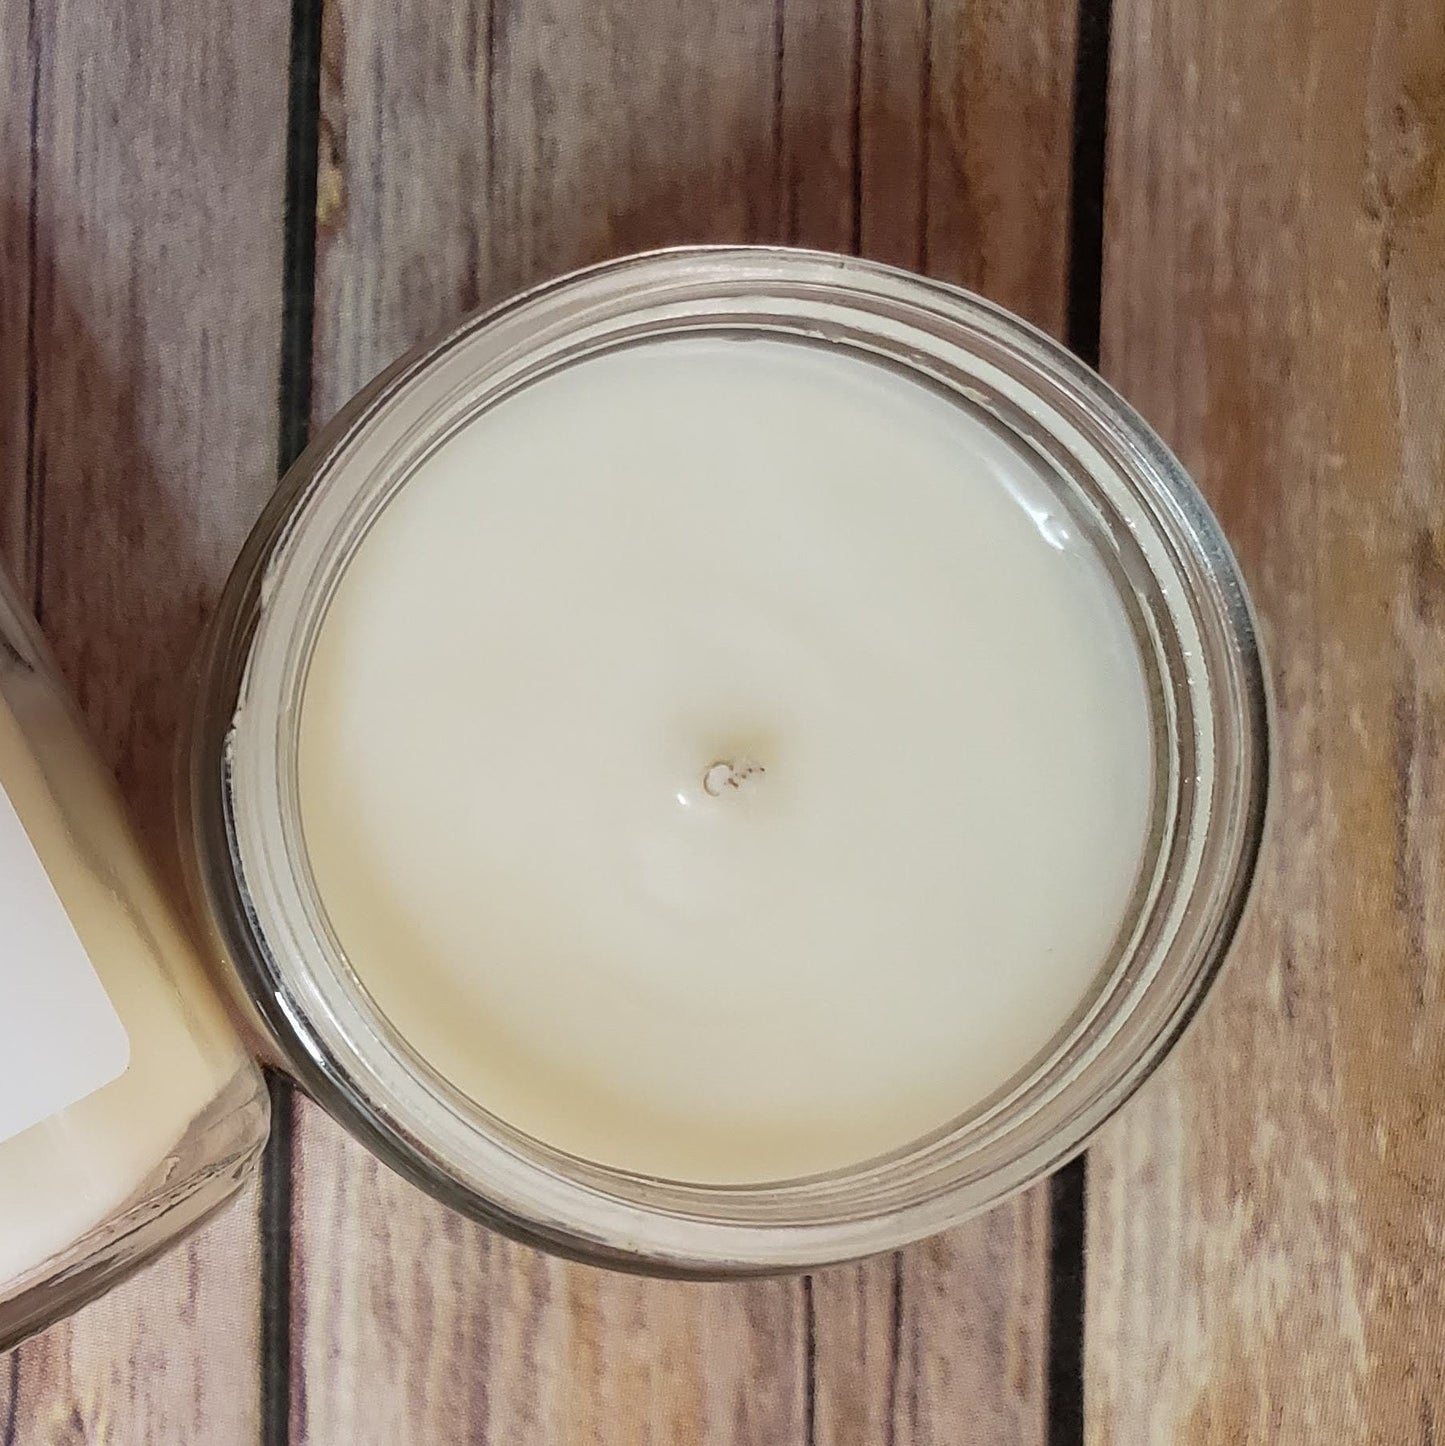 Ivy Creek No 34 | Caribbean Teakwood Soy Blend Candle | Hand Poured | 7 oz | Cotton Wick | Small Batch | Clean Burning | Container Candle